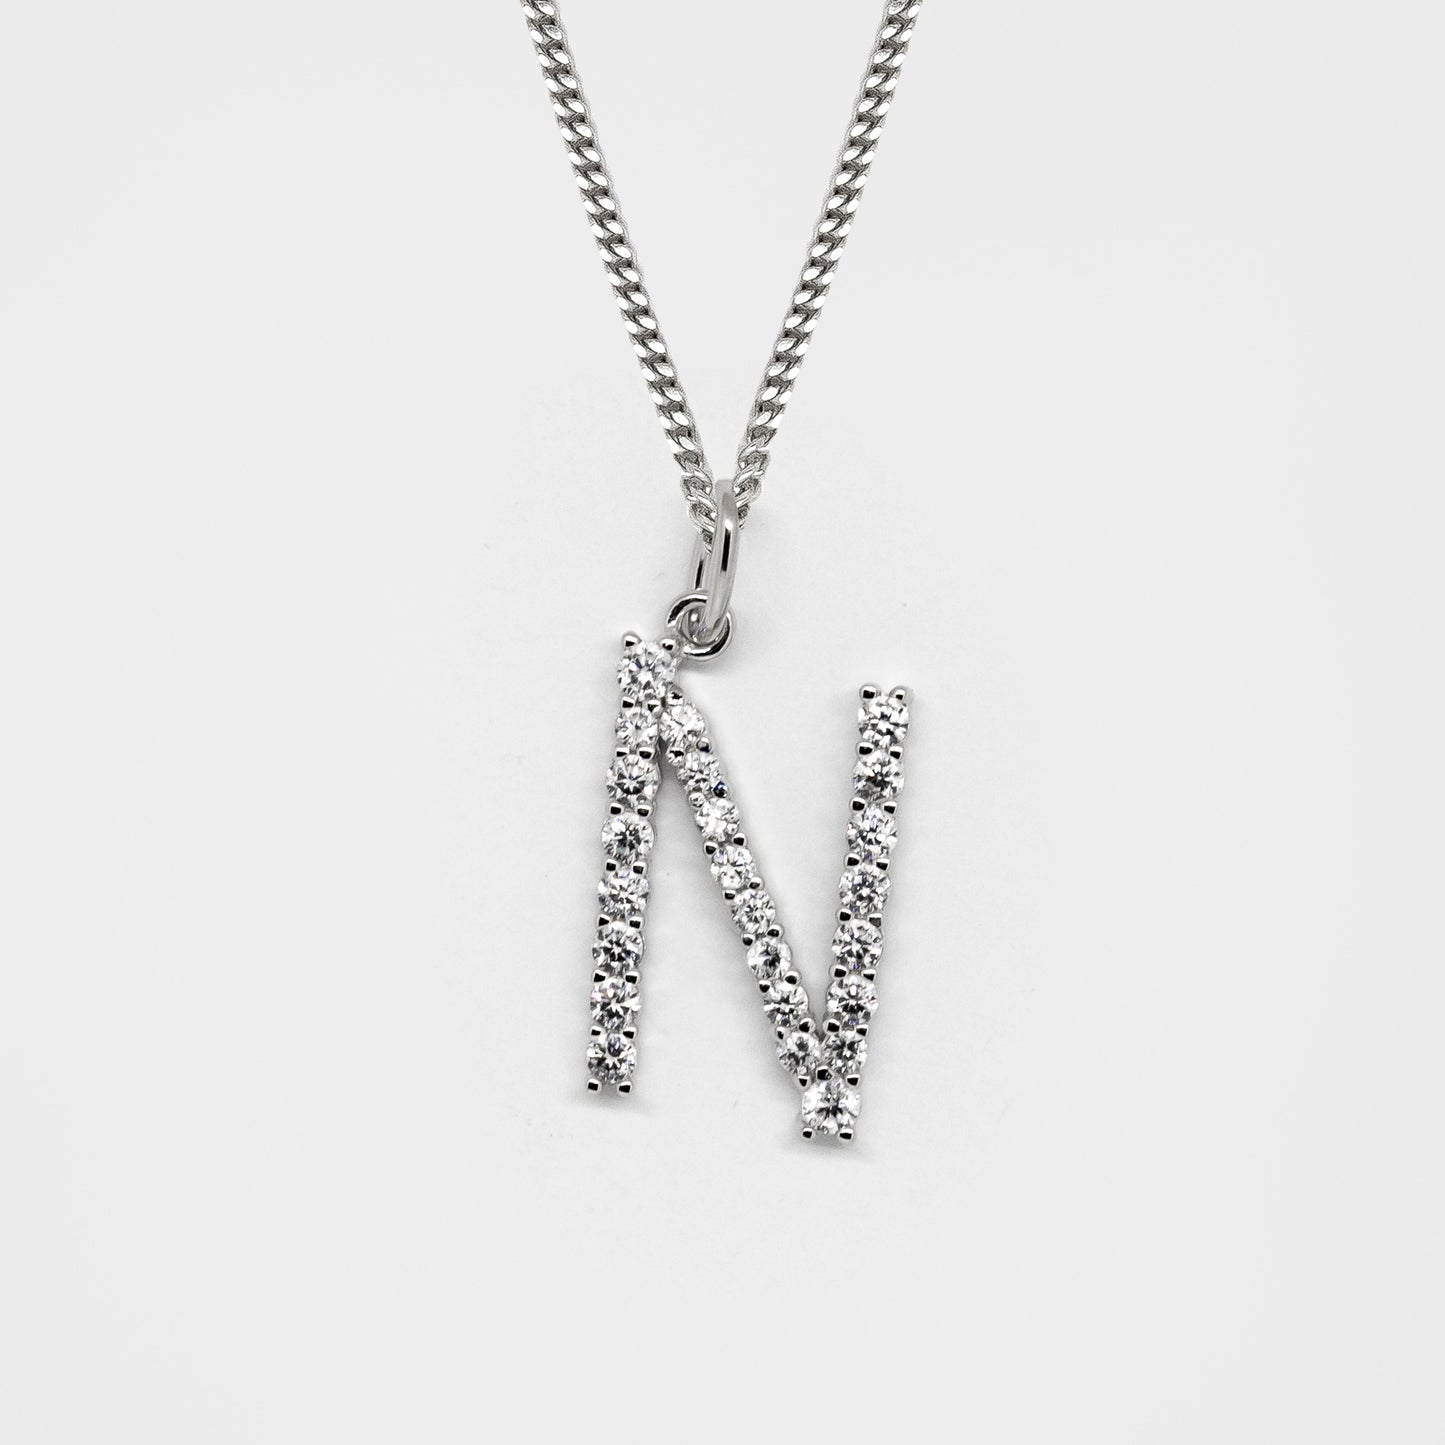 Silver 925 Initial Necklace - N